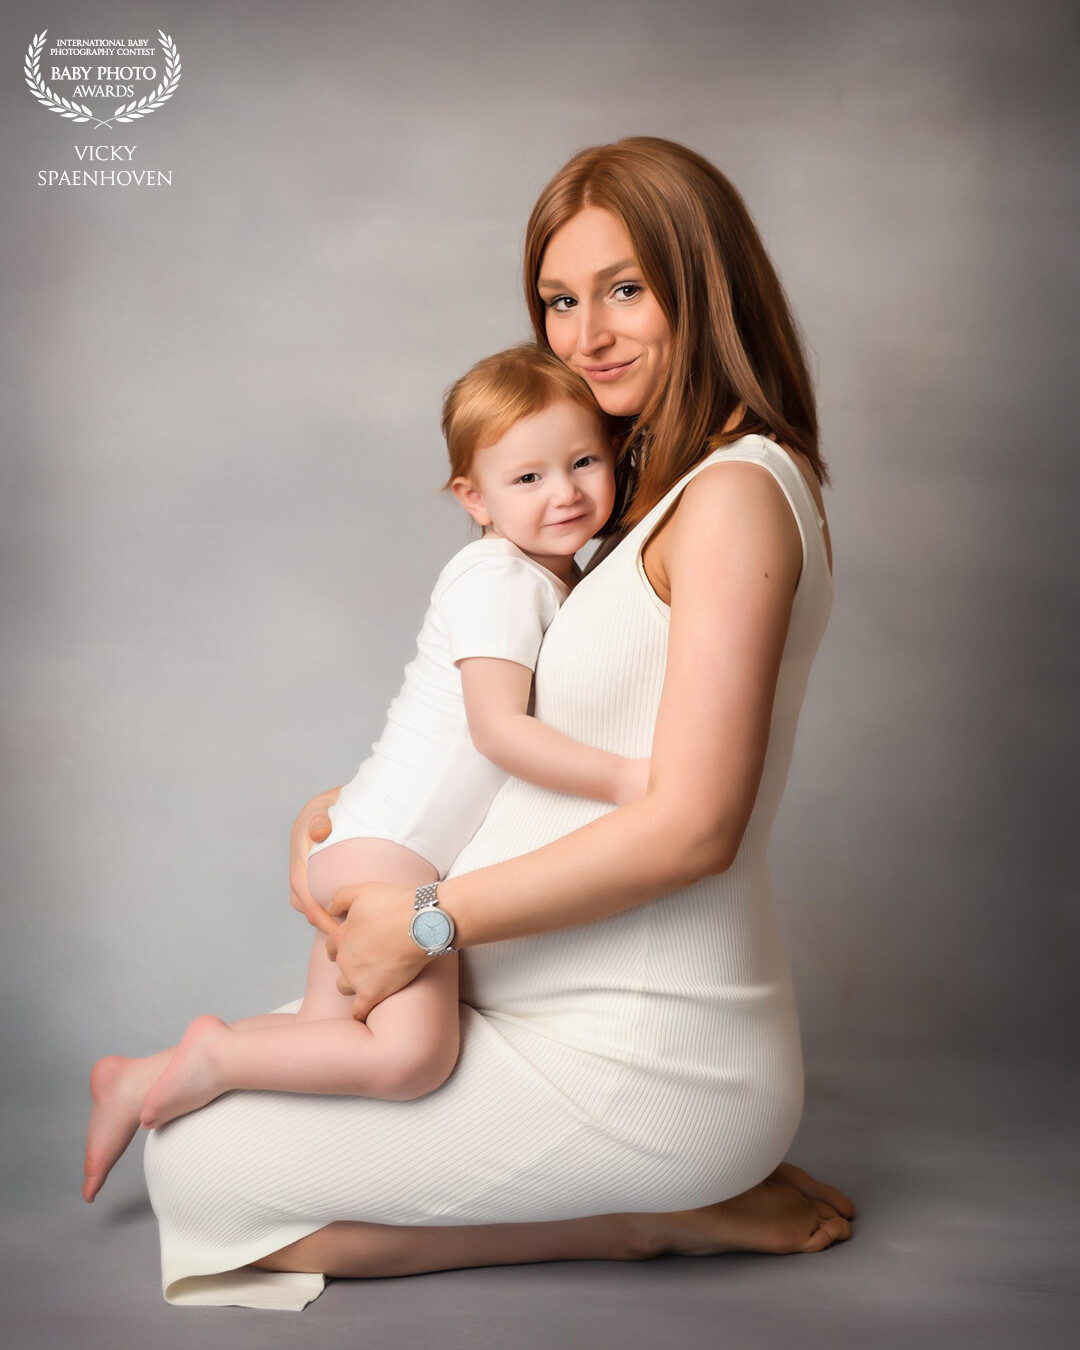 Photographing this little girl Morgane with her pregnant mom was so much fun. I love their connection.